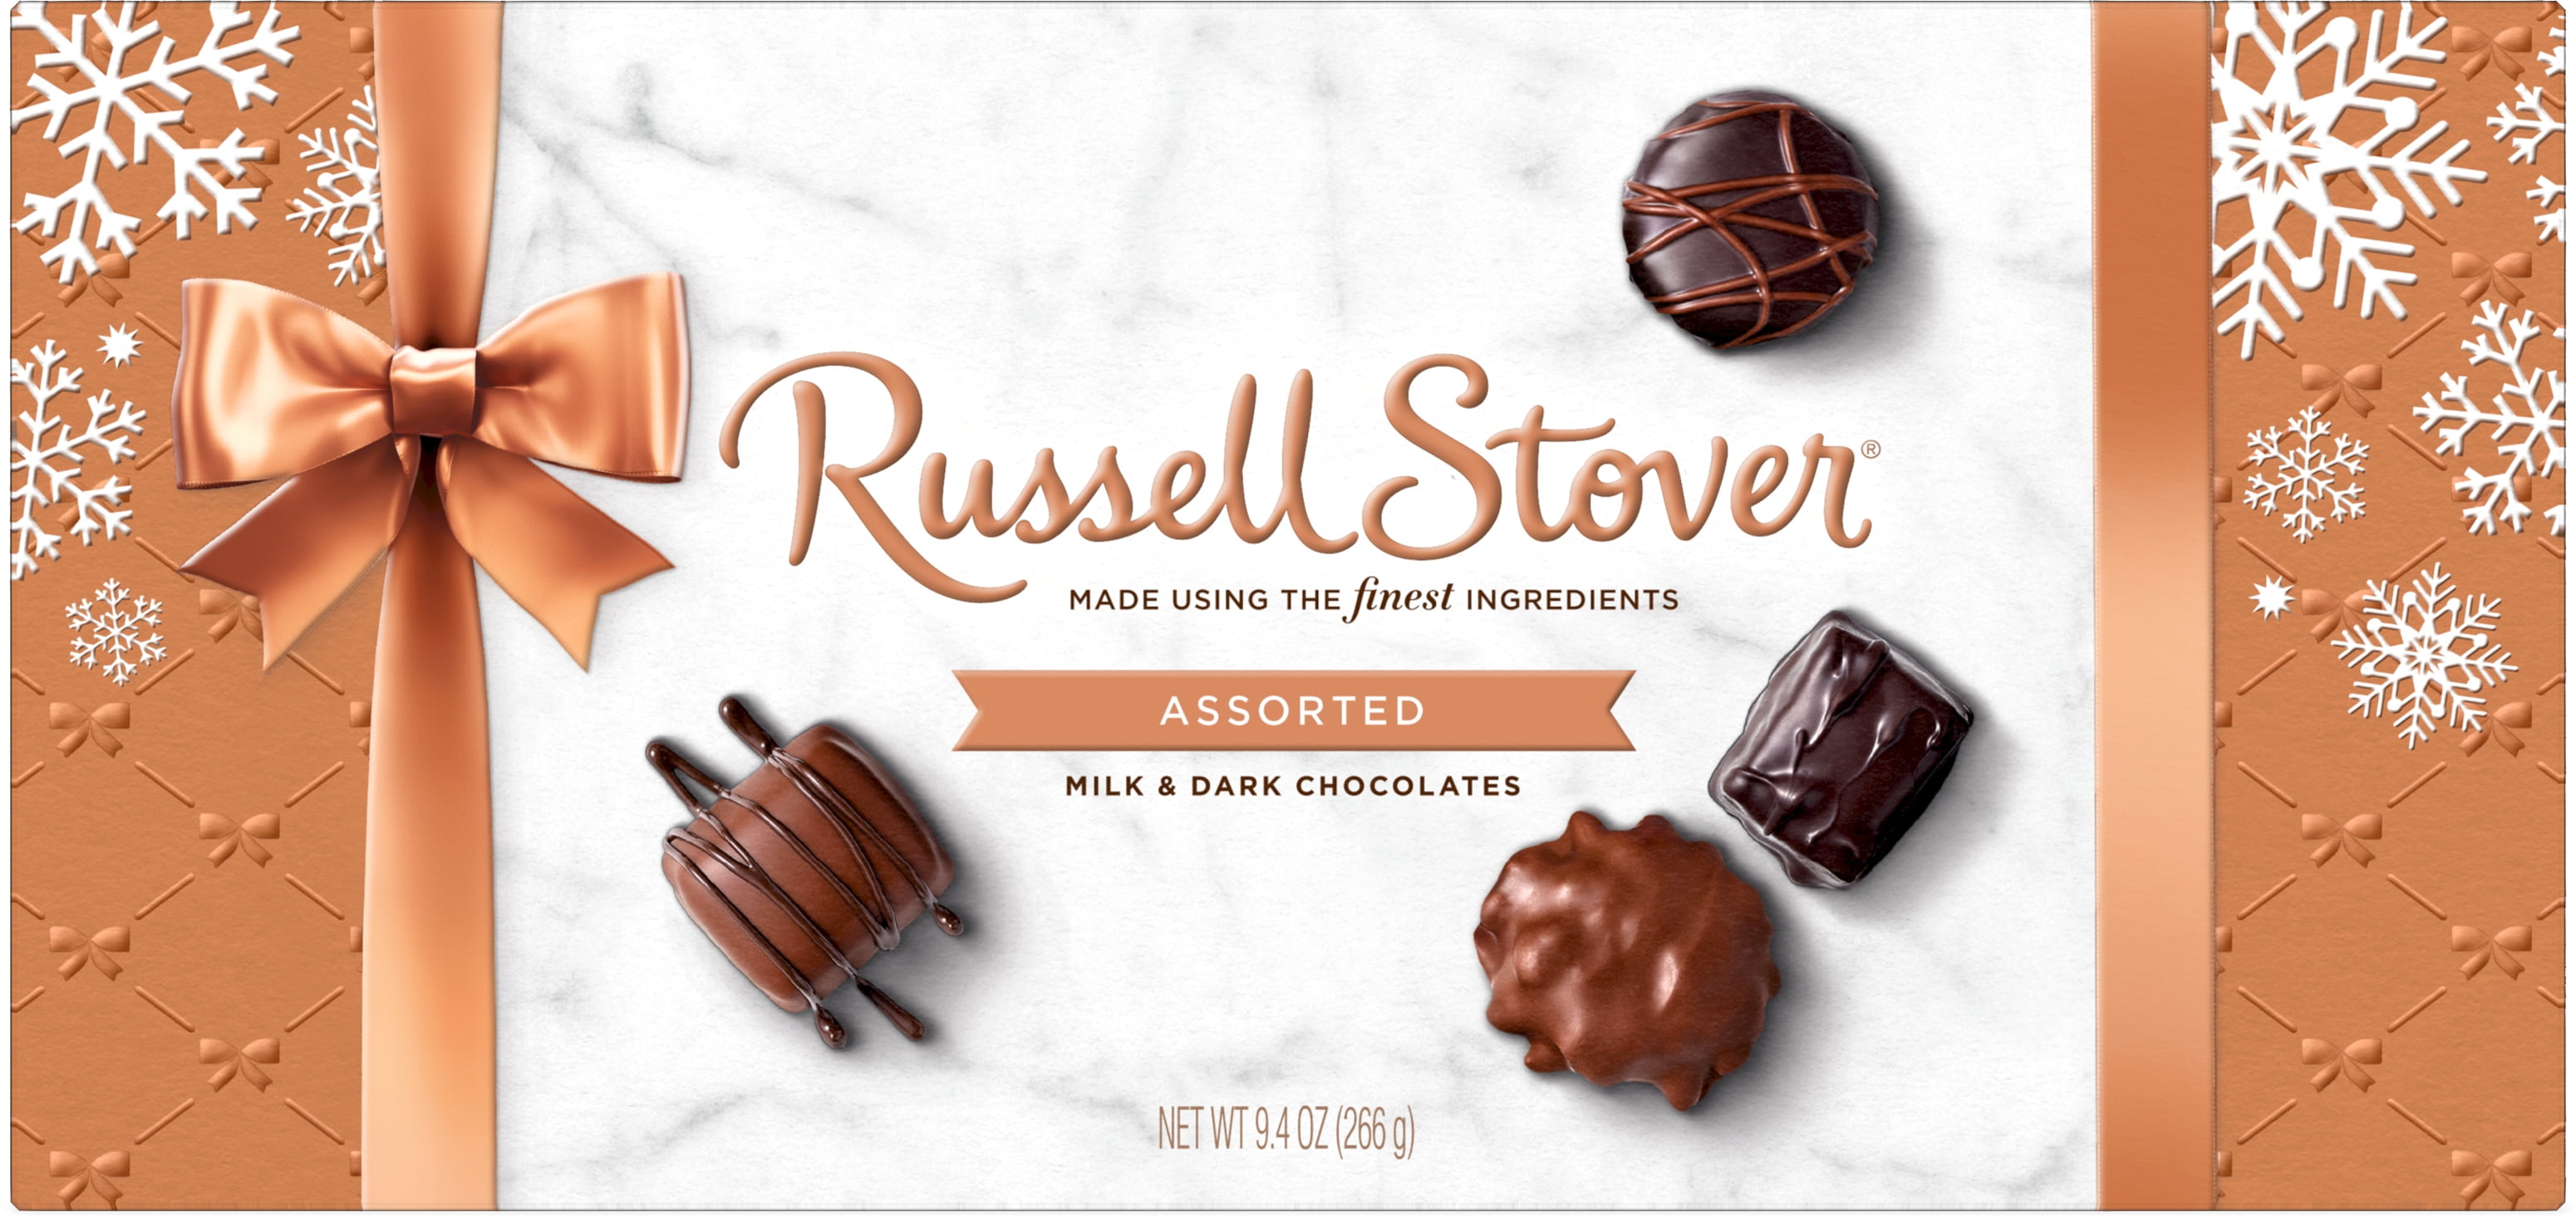 Russell Stover Holiday Assorted Milk Chocolate & Dark Chocolate Gift Box, 9.4 oz. (16 pieces)